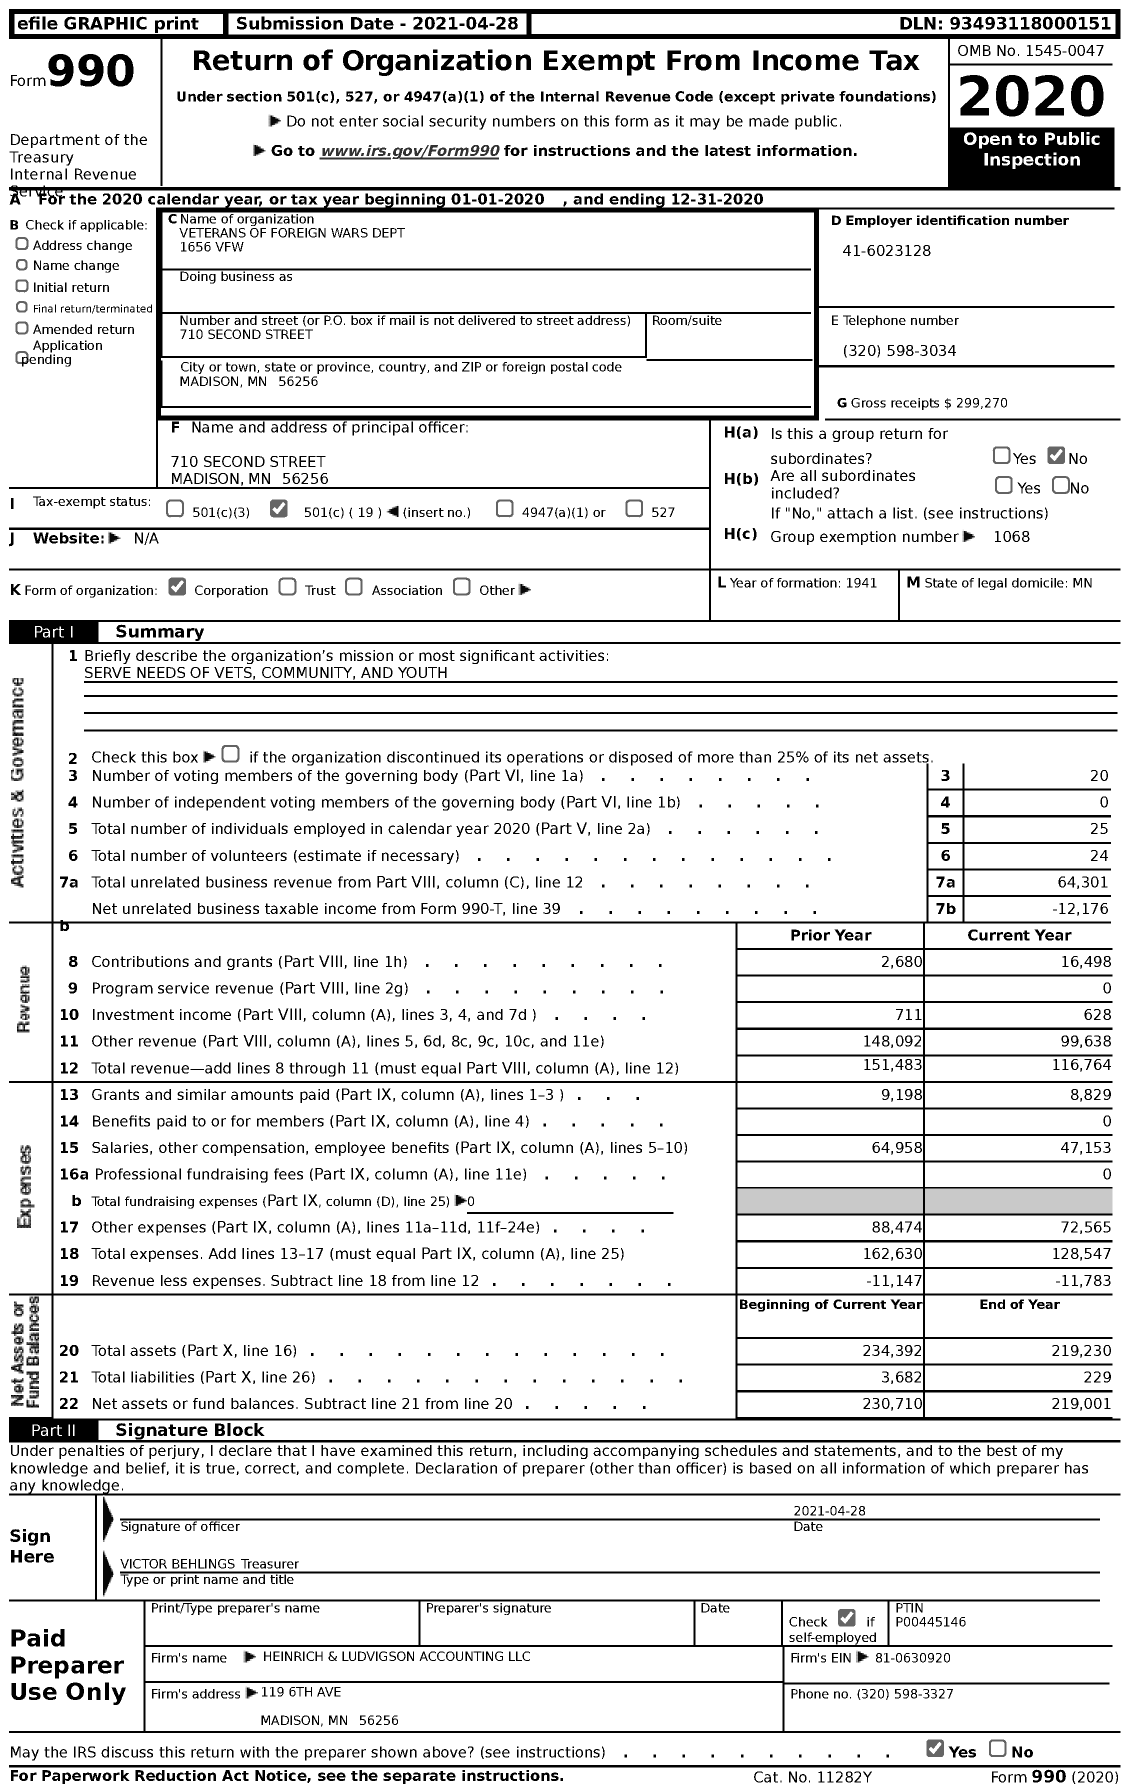 Image of first page of 2020 Form 990 for MN VFW - Veterans of Foreign Wars Dept 1656 VFW